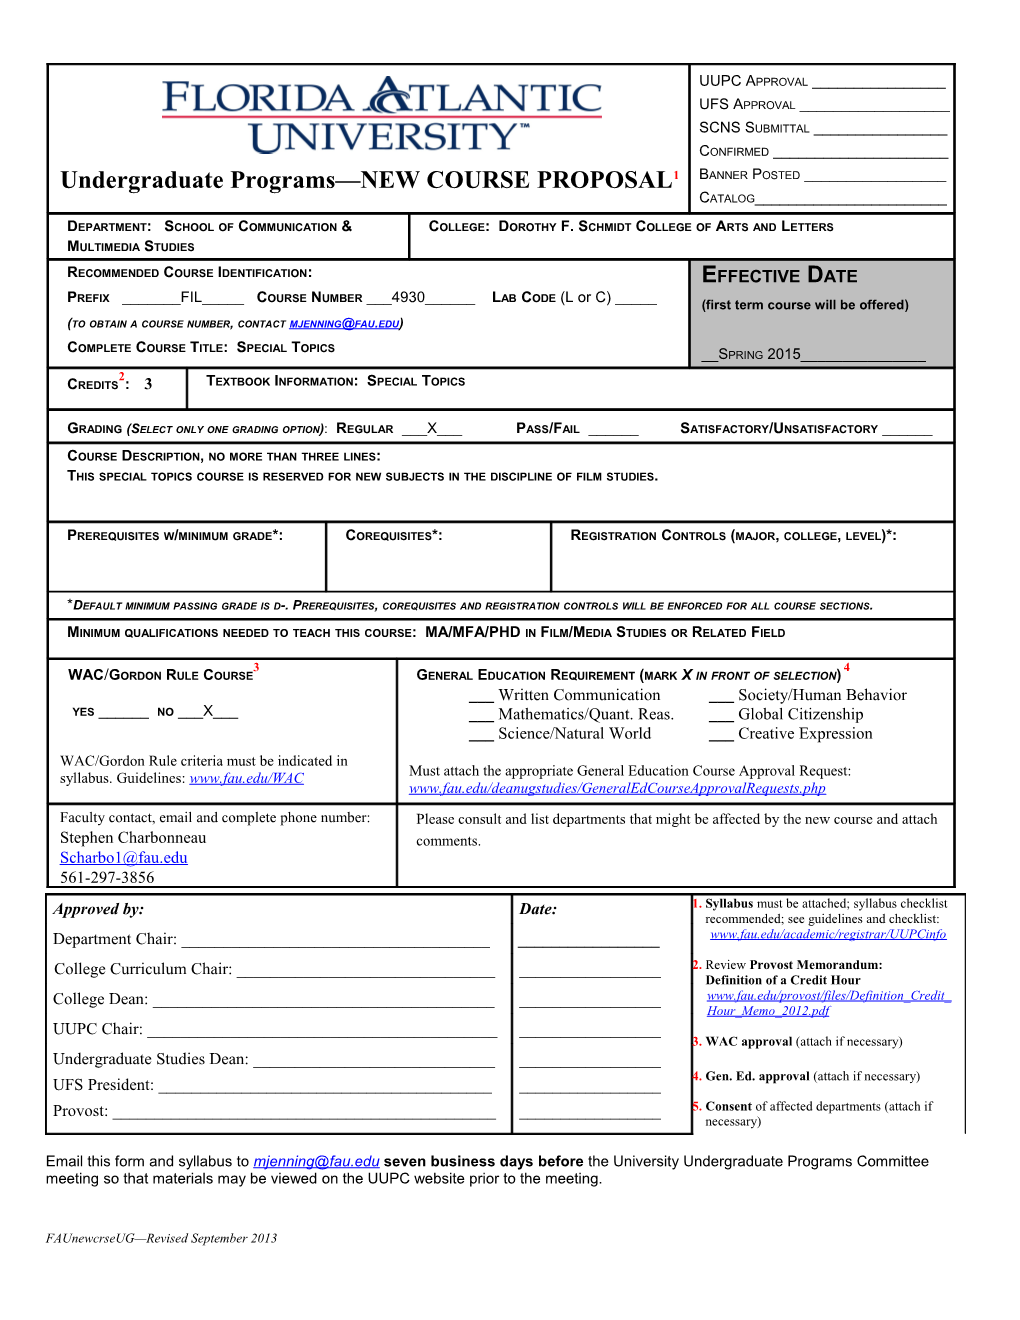 CD037, Course Termination Or Change Transmittal Form s11